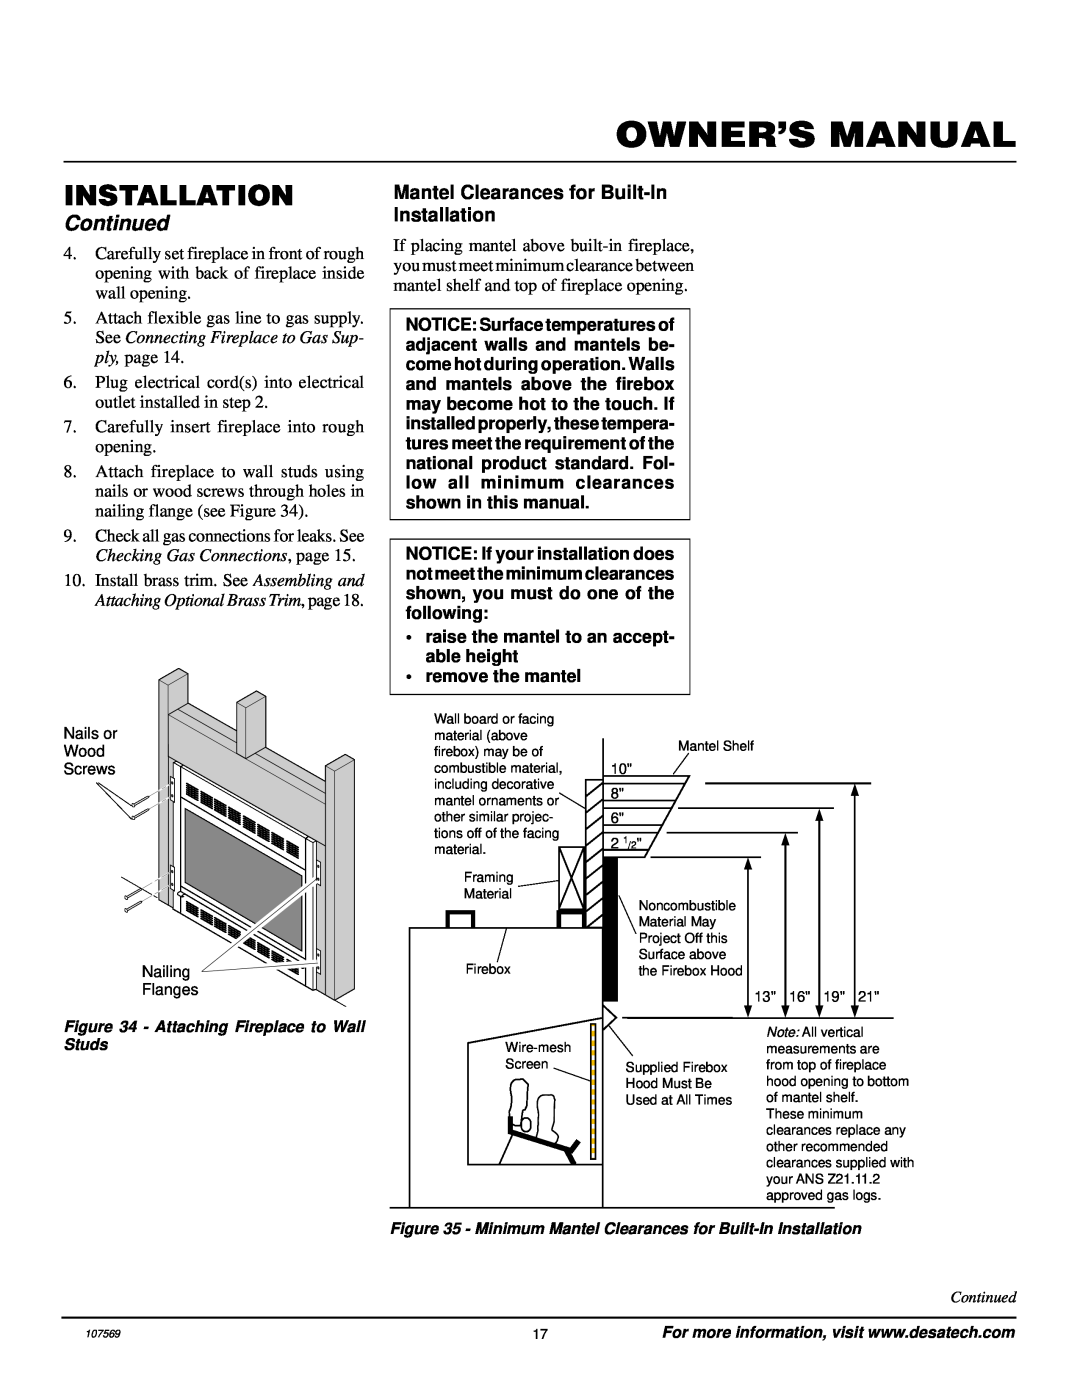 Desa CGEFP33NR Continued, Mantel Clearances for Built-InInstallation, raise the mantel to an accept- able height 